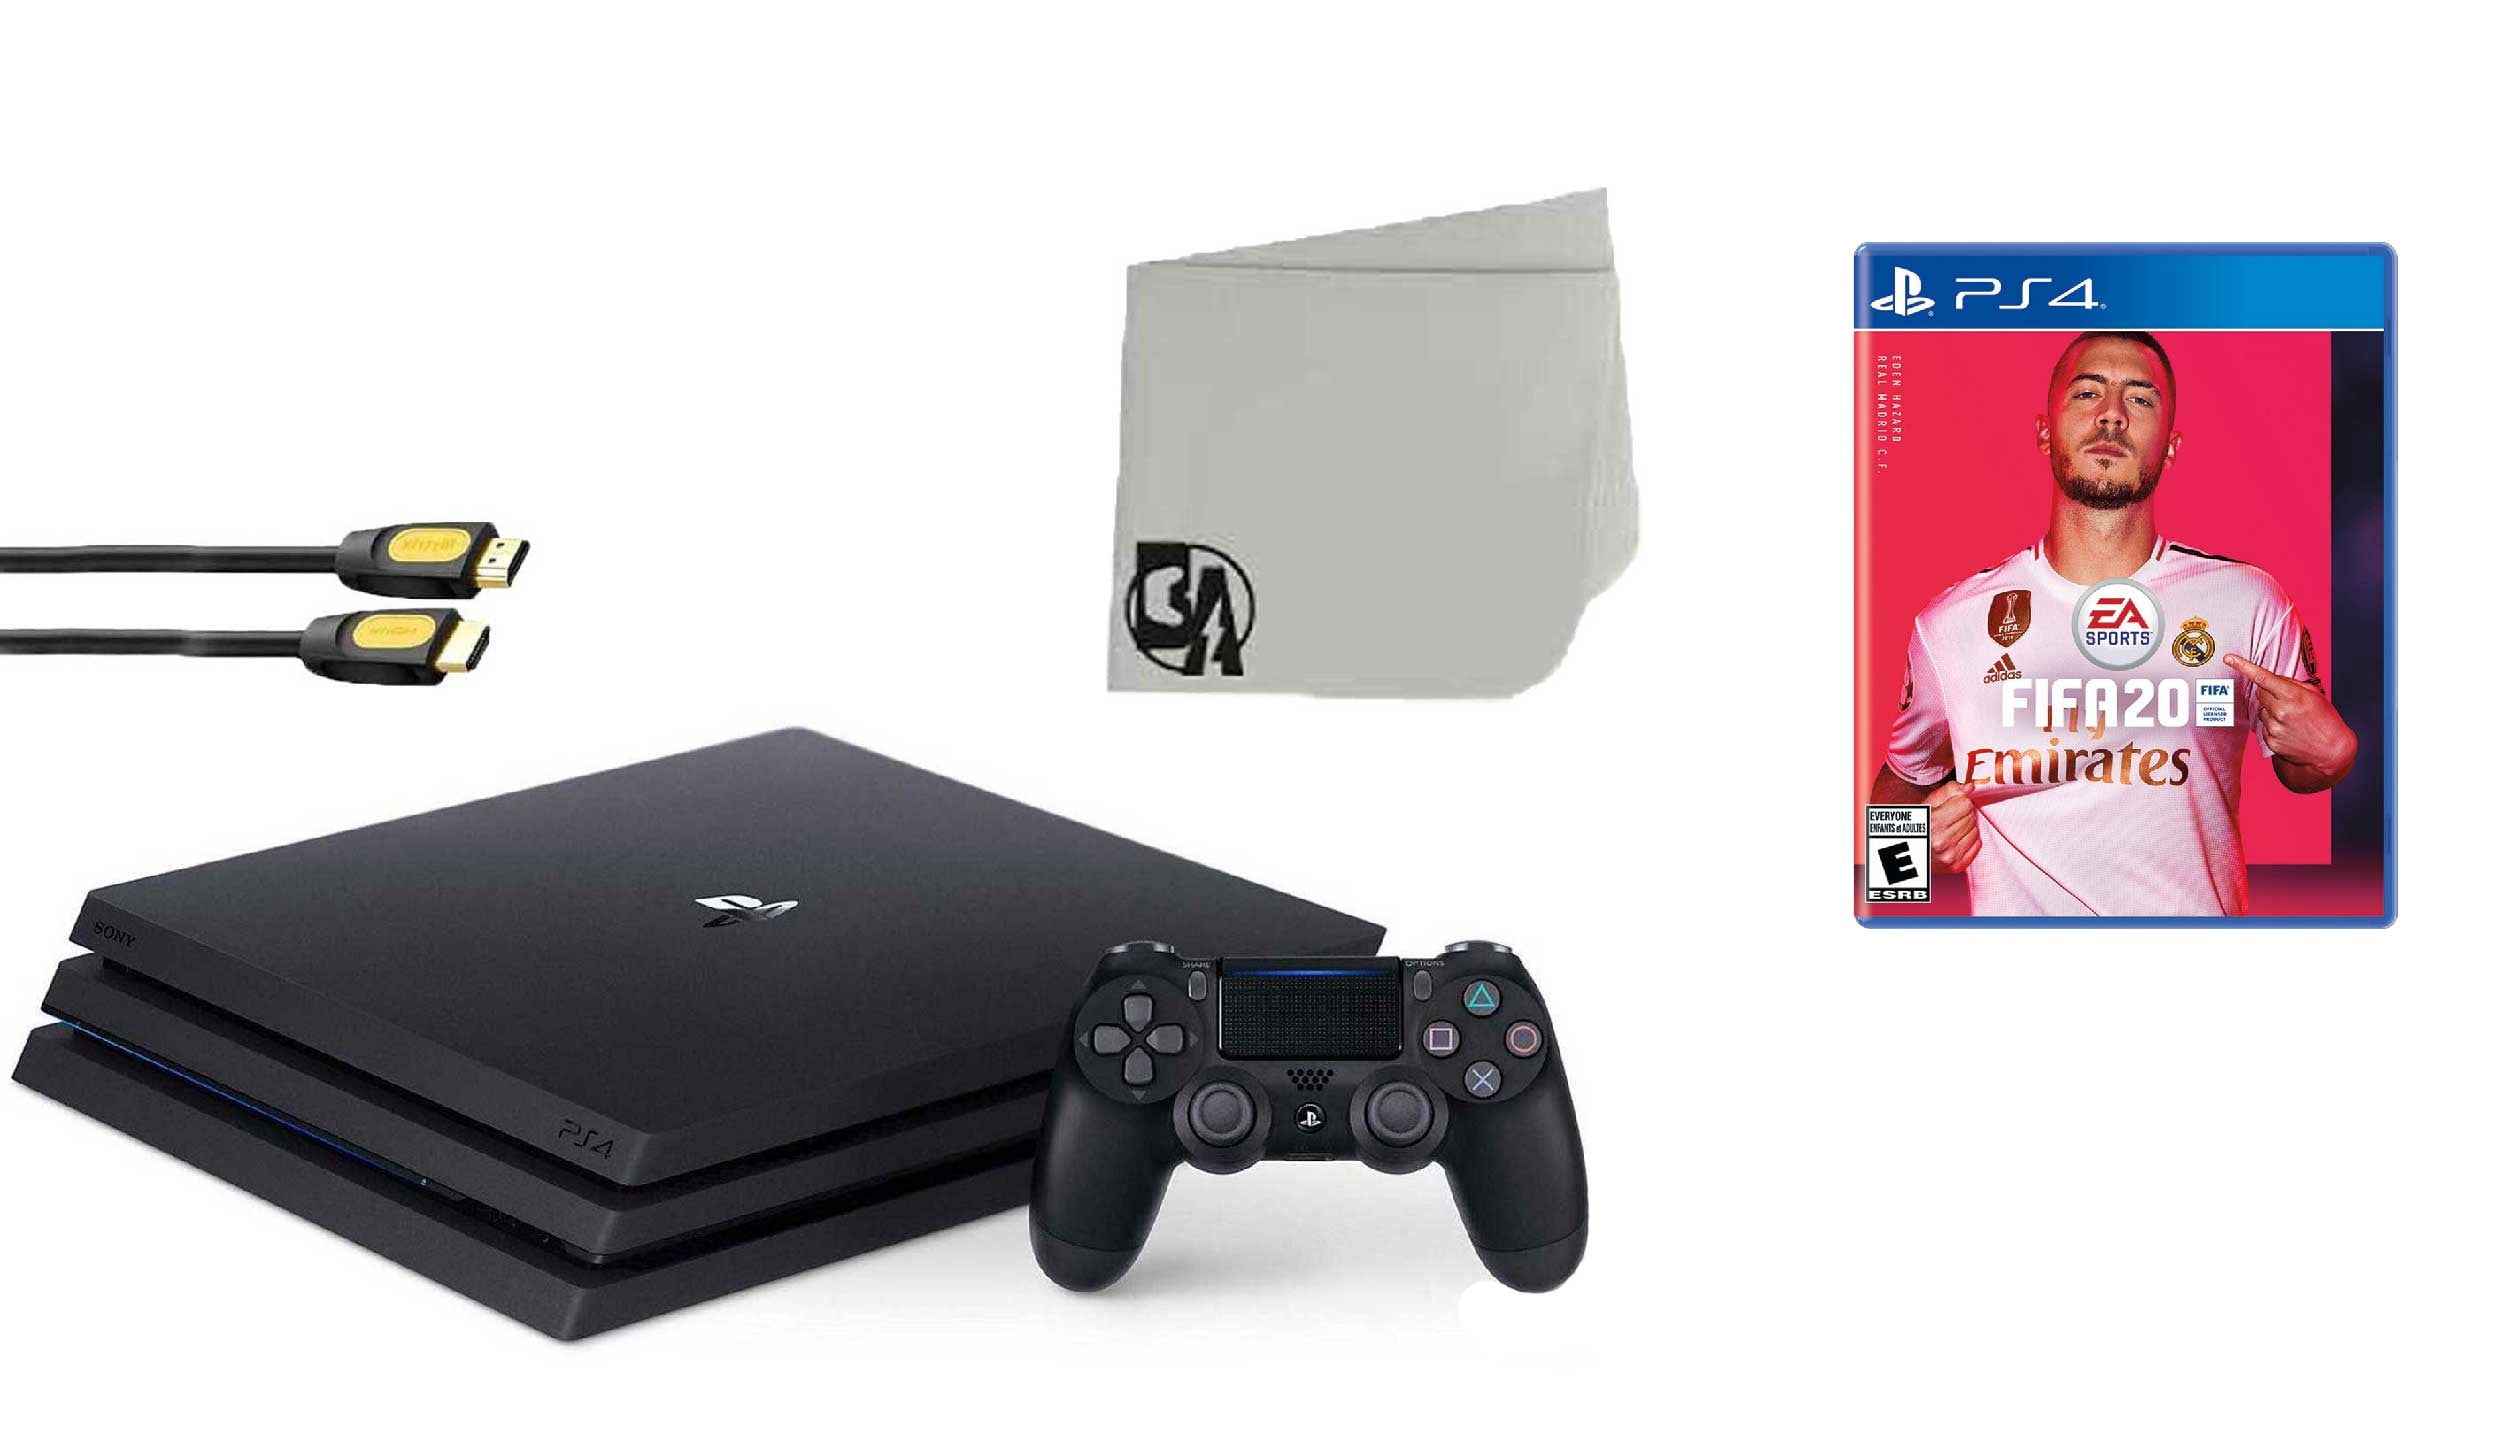 Sony PS4 PlayStation 4 PRO 1TB + FIFA 18 Console cheap - Price of $305.09